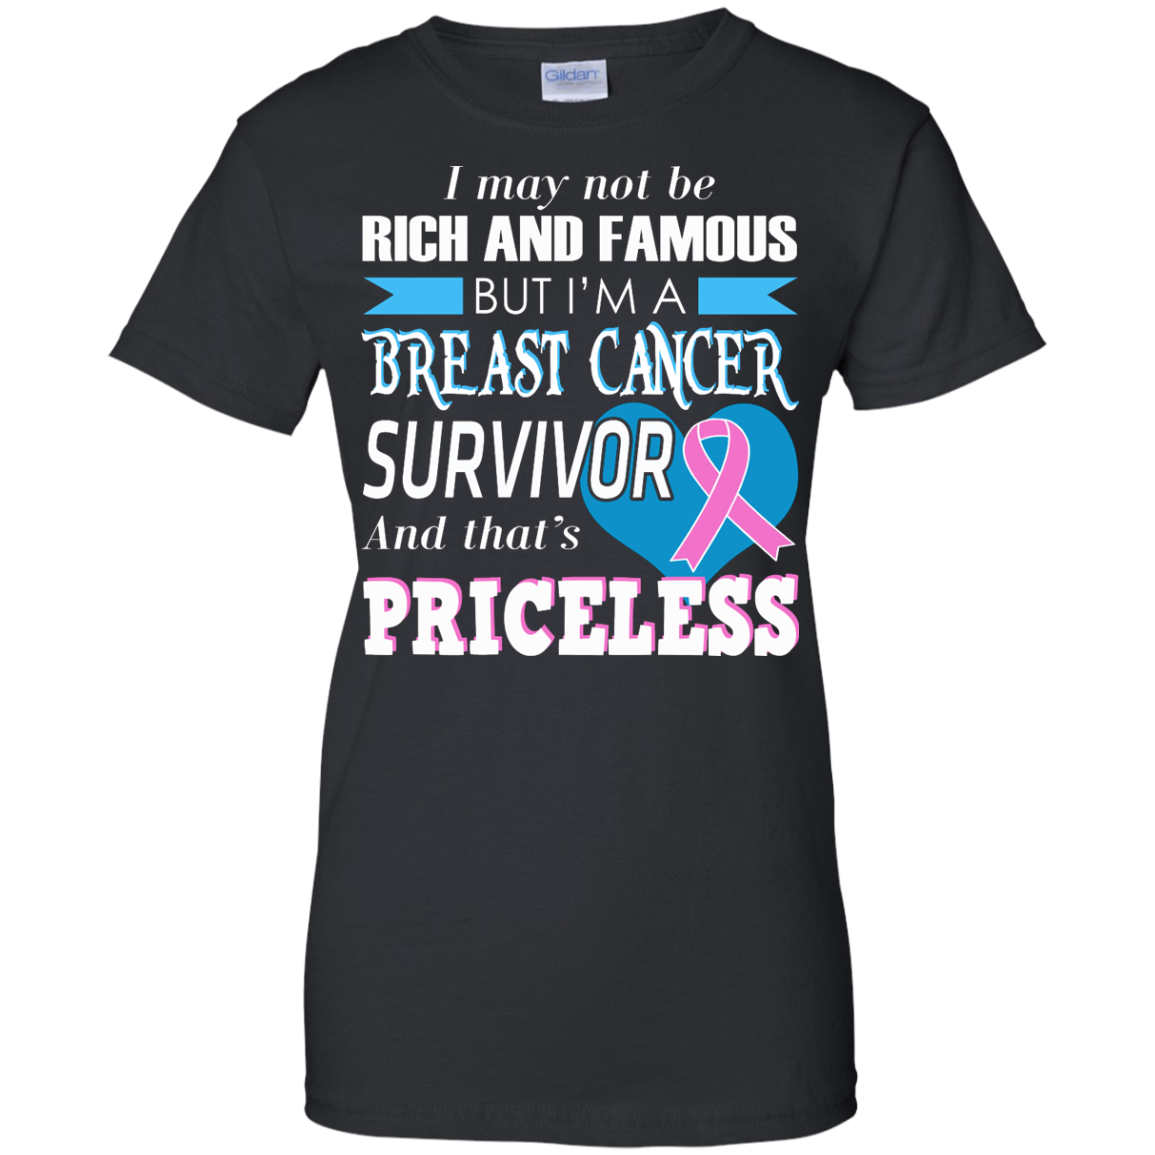 I May Not Be Rich And Famous But I'm A Breast Cancer Survivor T-Shirt ...